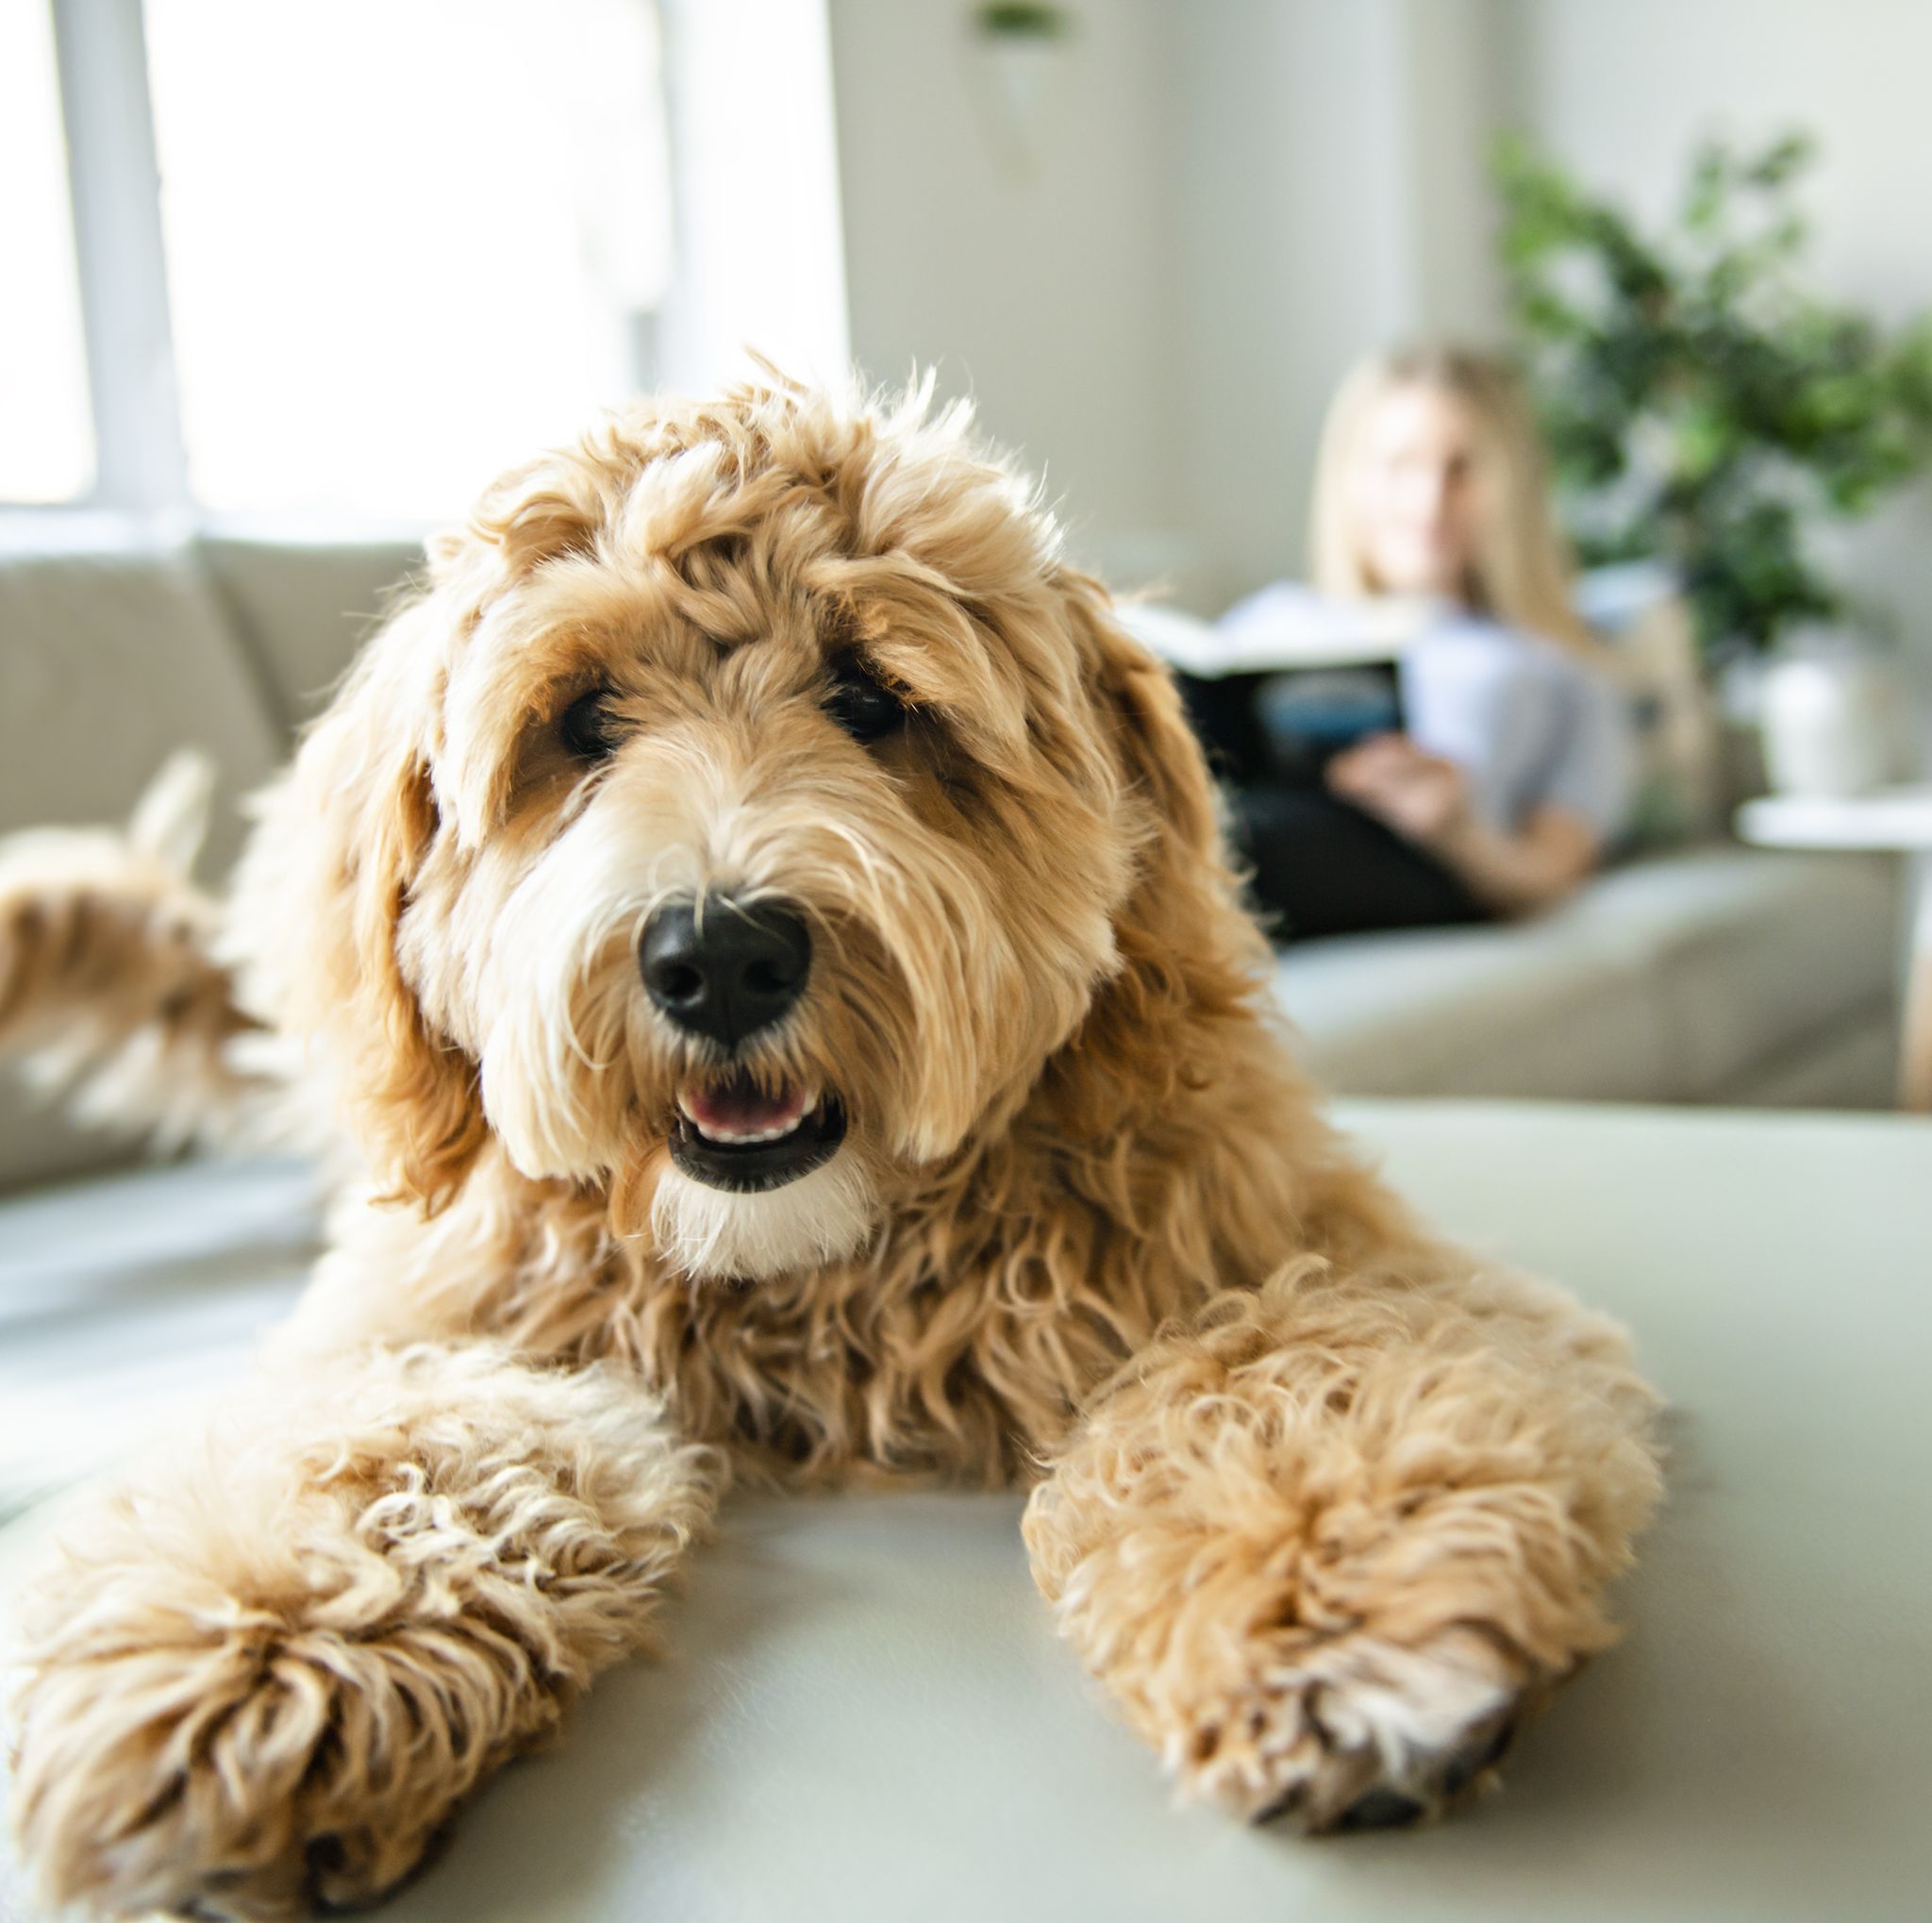 https://hips.hearstapps.com/hmg-prod/images/woman-with-his-golden-labradoodle-dog-reading-at-royalty-free-image-1599209569.jpg?crop=0.670xw:1.00xh;0.104xw,0&resize=2048:*